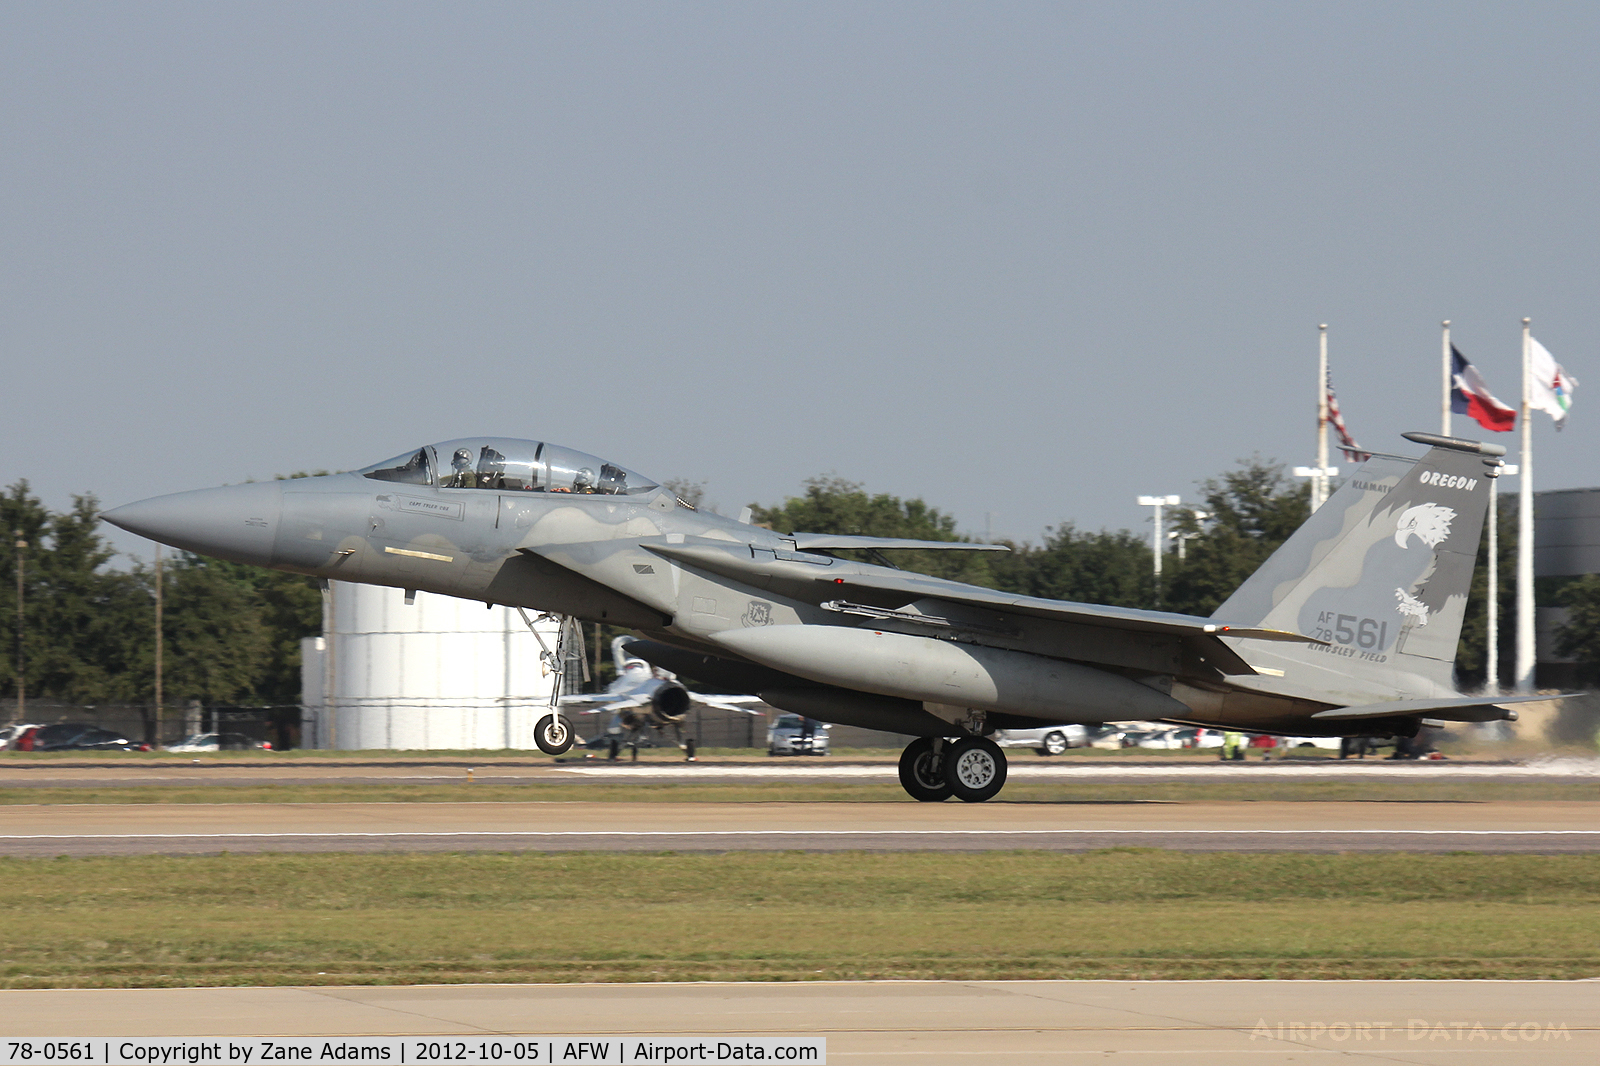 78-0561, 1978 McDonnell Douglas F-15D Eagle C/N 0450/D001, At the 2012 Alliance Airshow - Fort Worth, TX